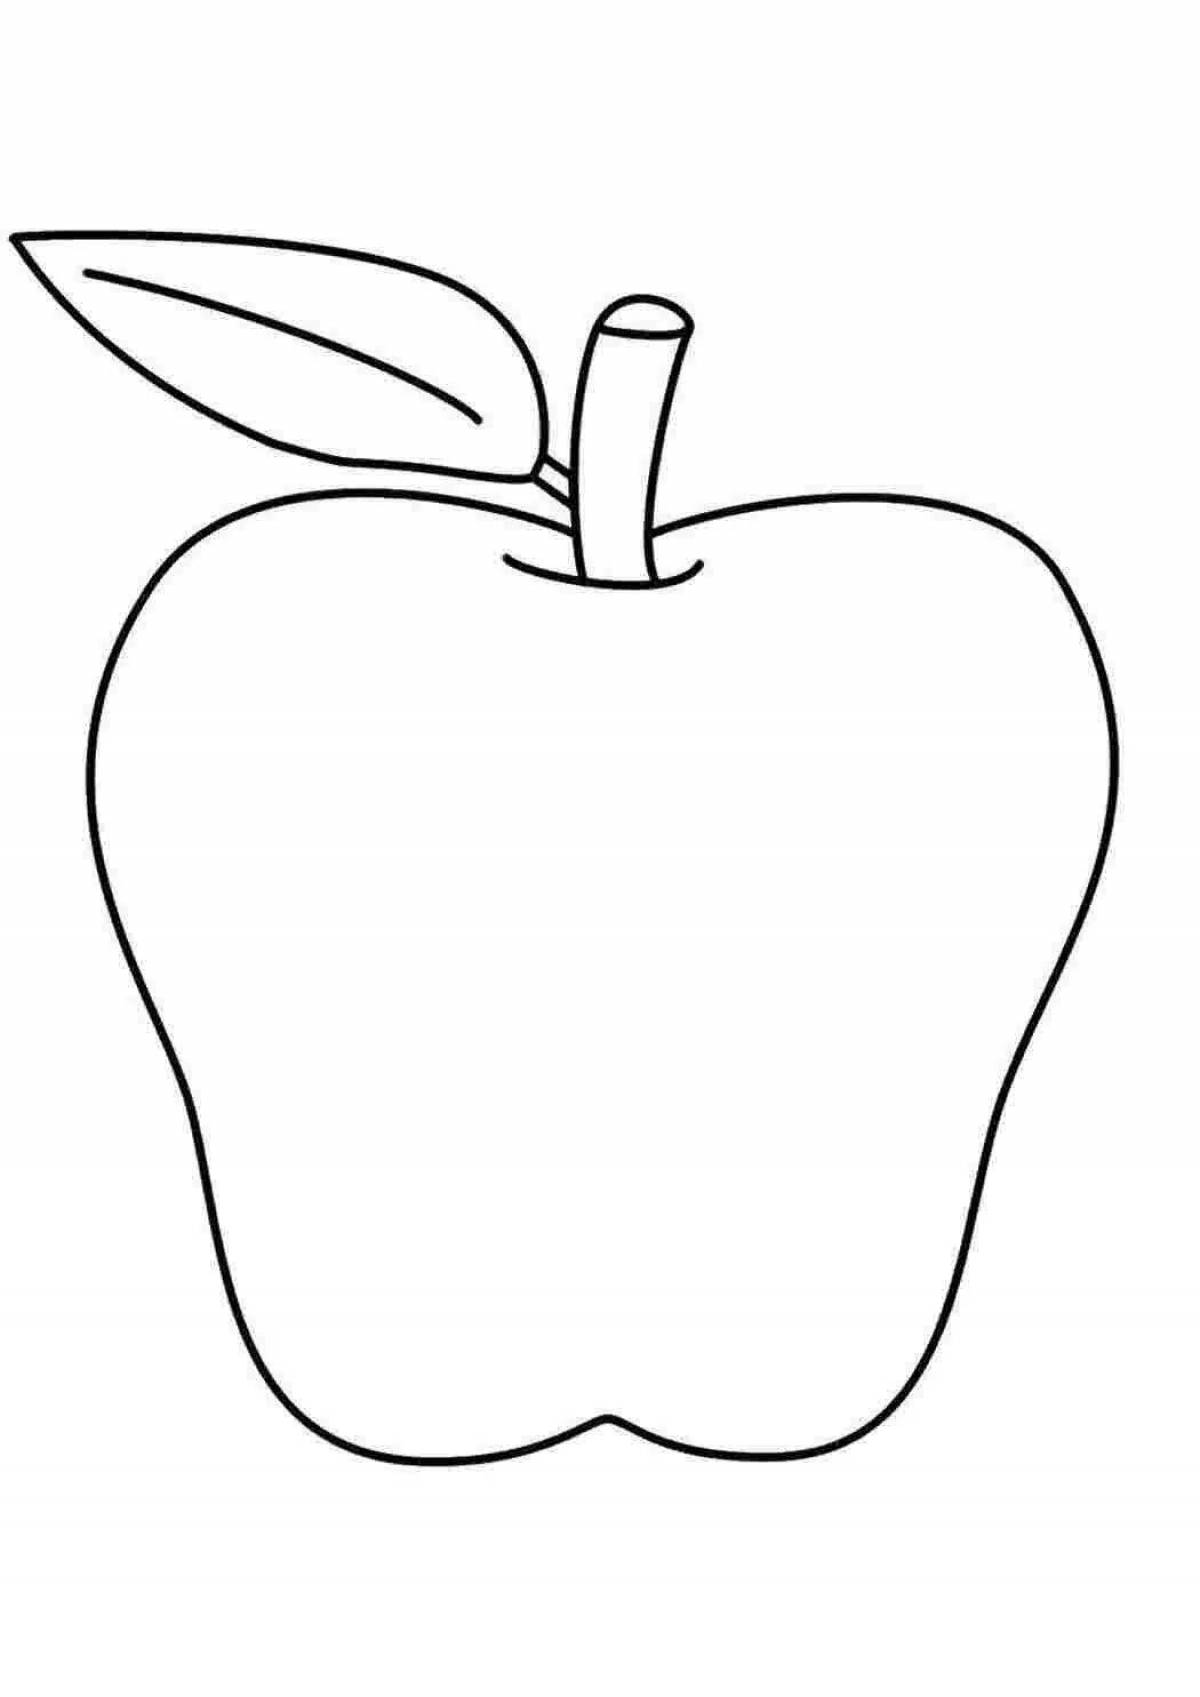 Coloring page with bright apple pattern